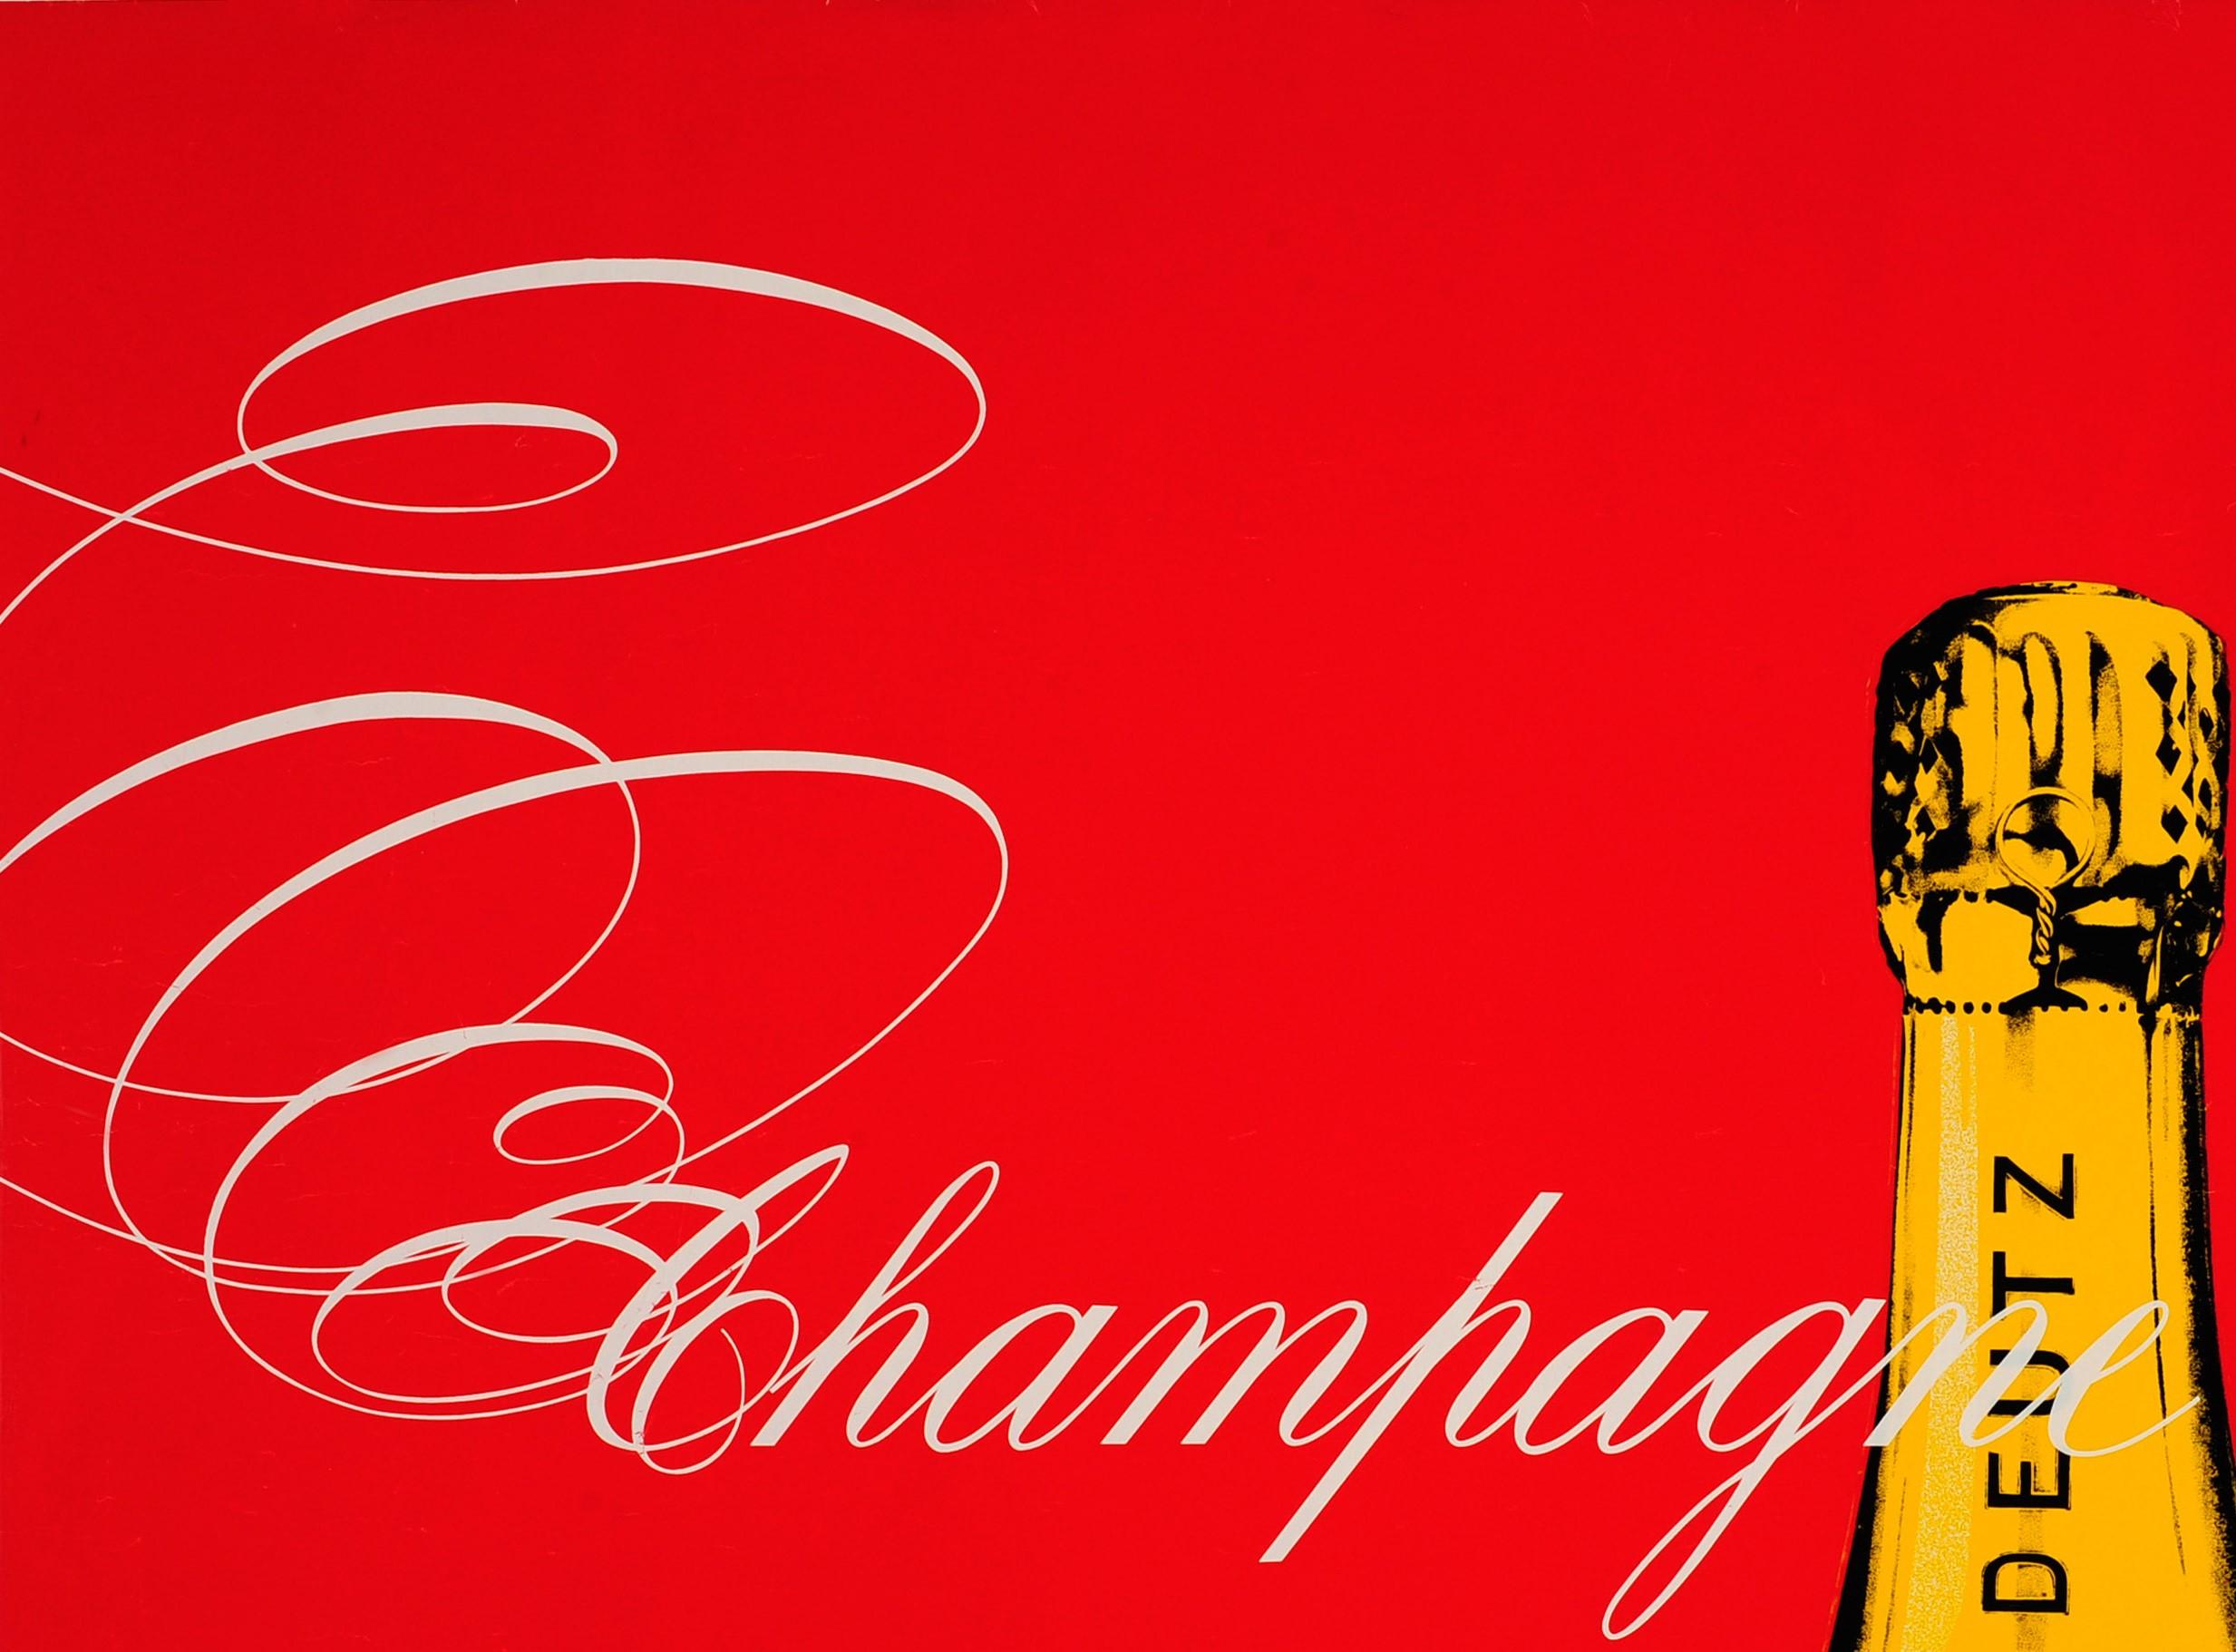 Original vintage advertising poster for Champagne Deutz featuring a great design showing the gold seal and label at the top of a brut Deutz champagne bottle against a bold red background with stylised white writing across the centre, the label